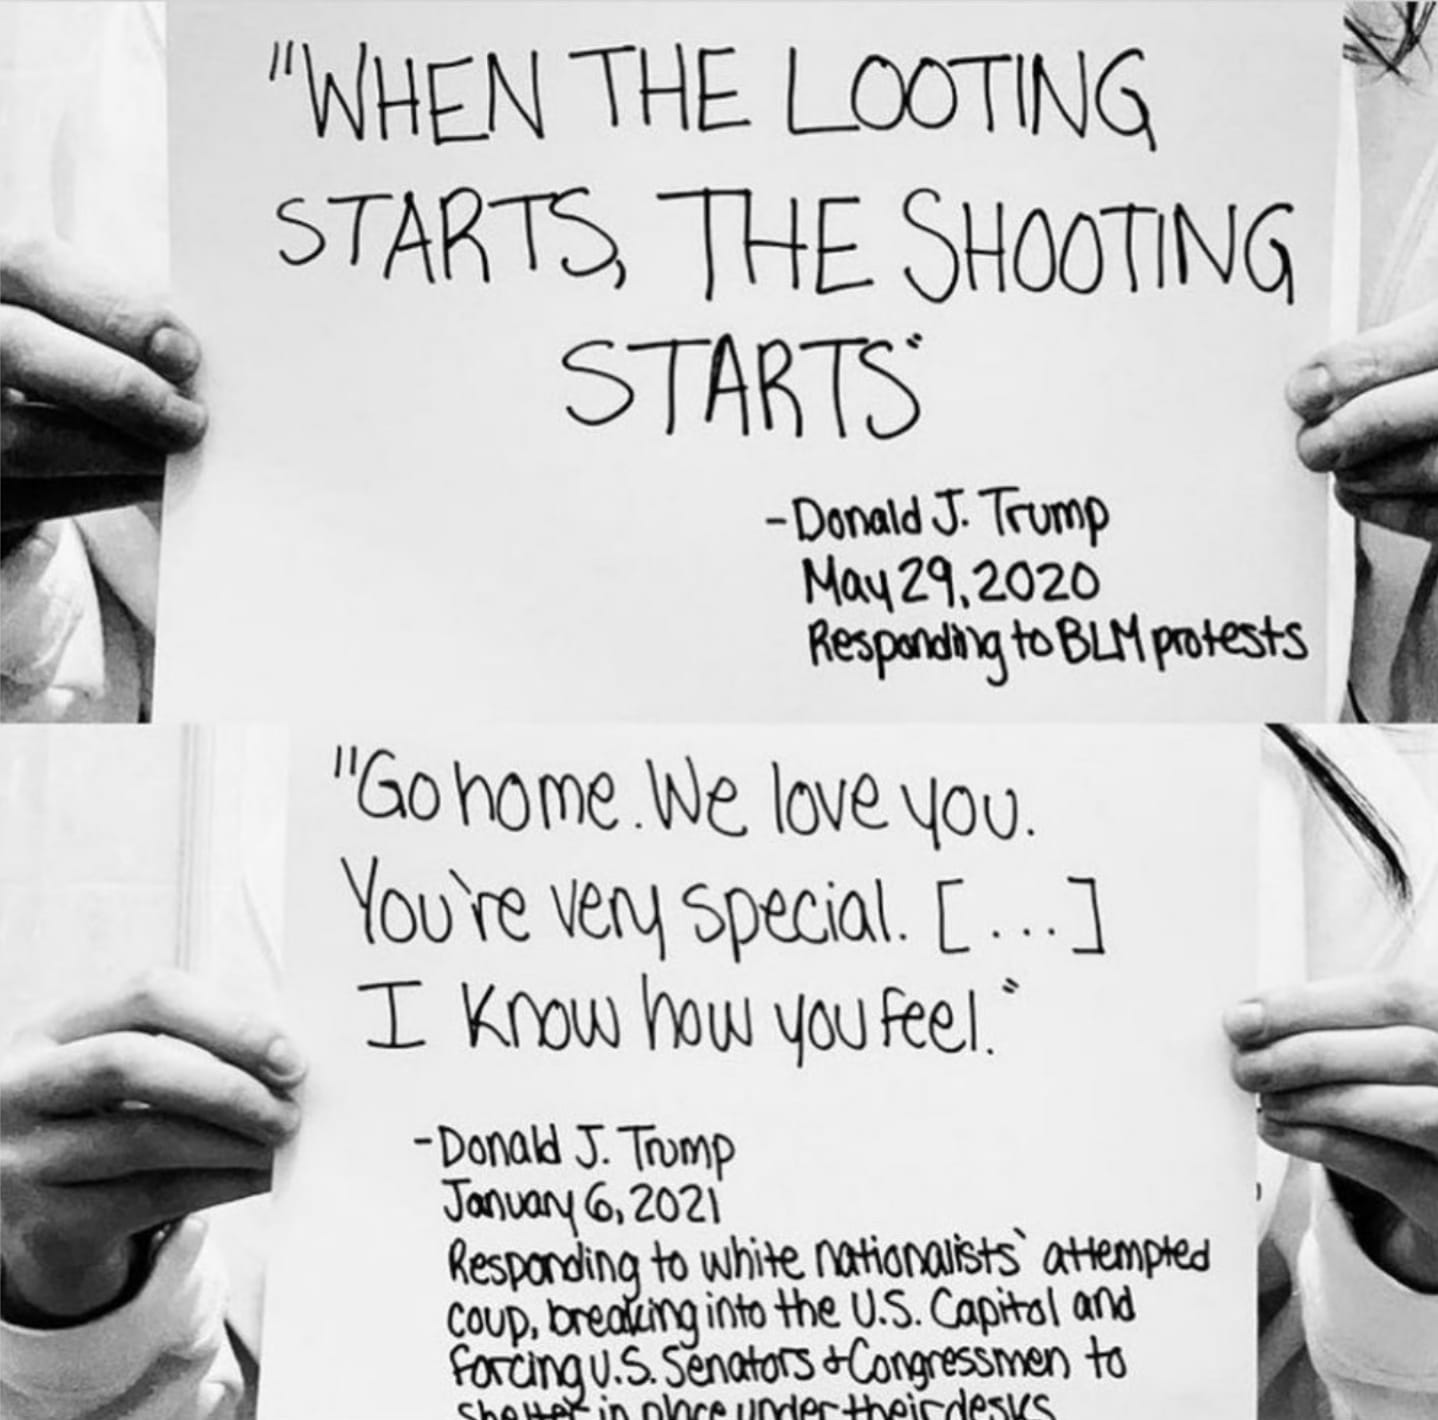 when the looting starts, the shooting starts, go home we love you, you're very special, i know how you feel, donald j trump responding to blm protests and white nationalists' attempted coup